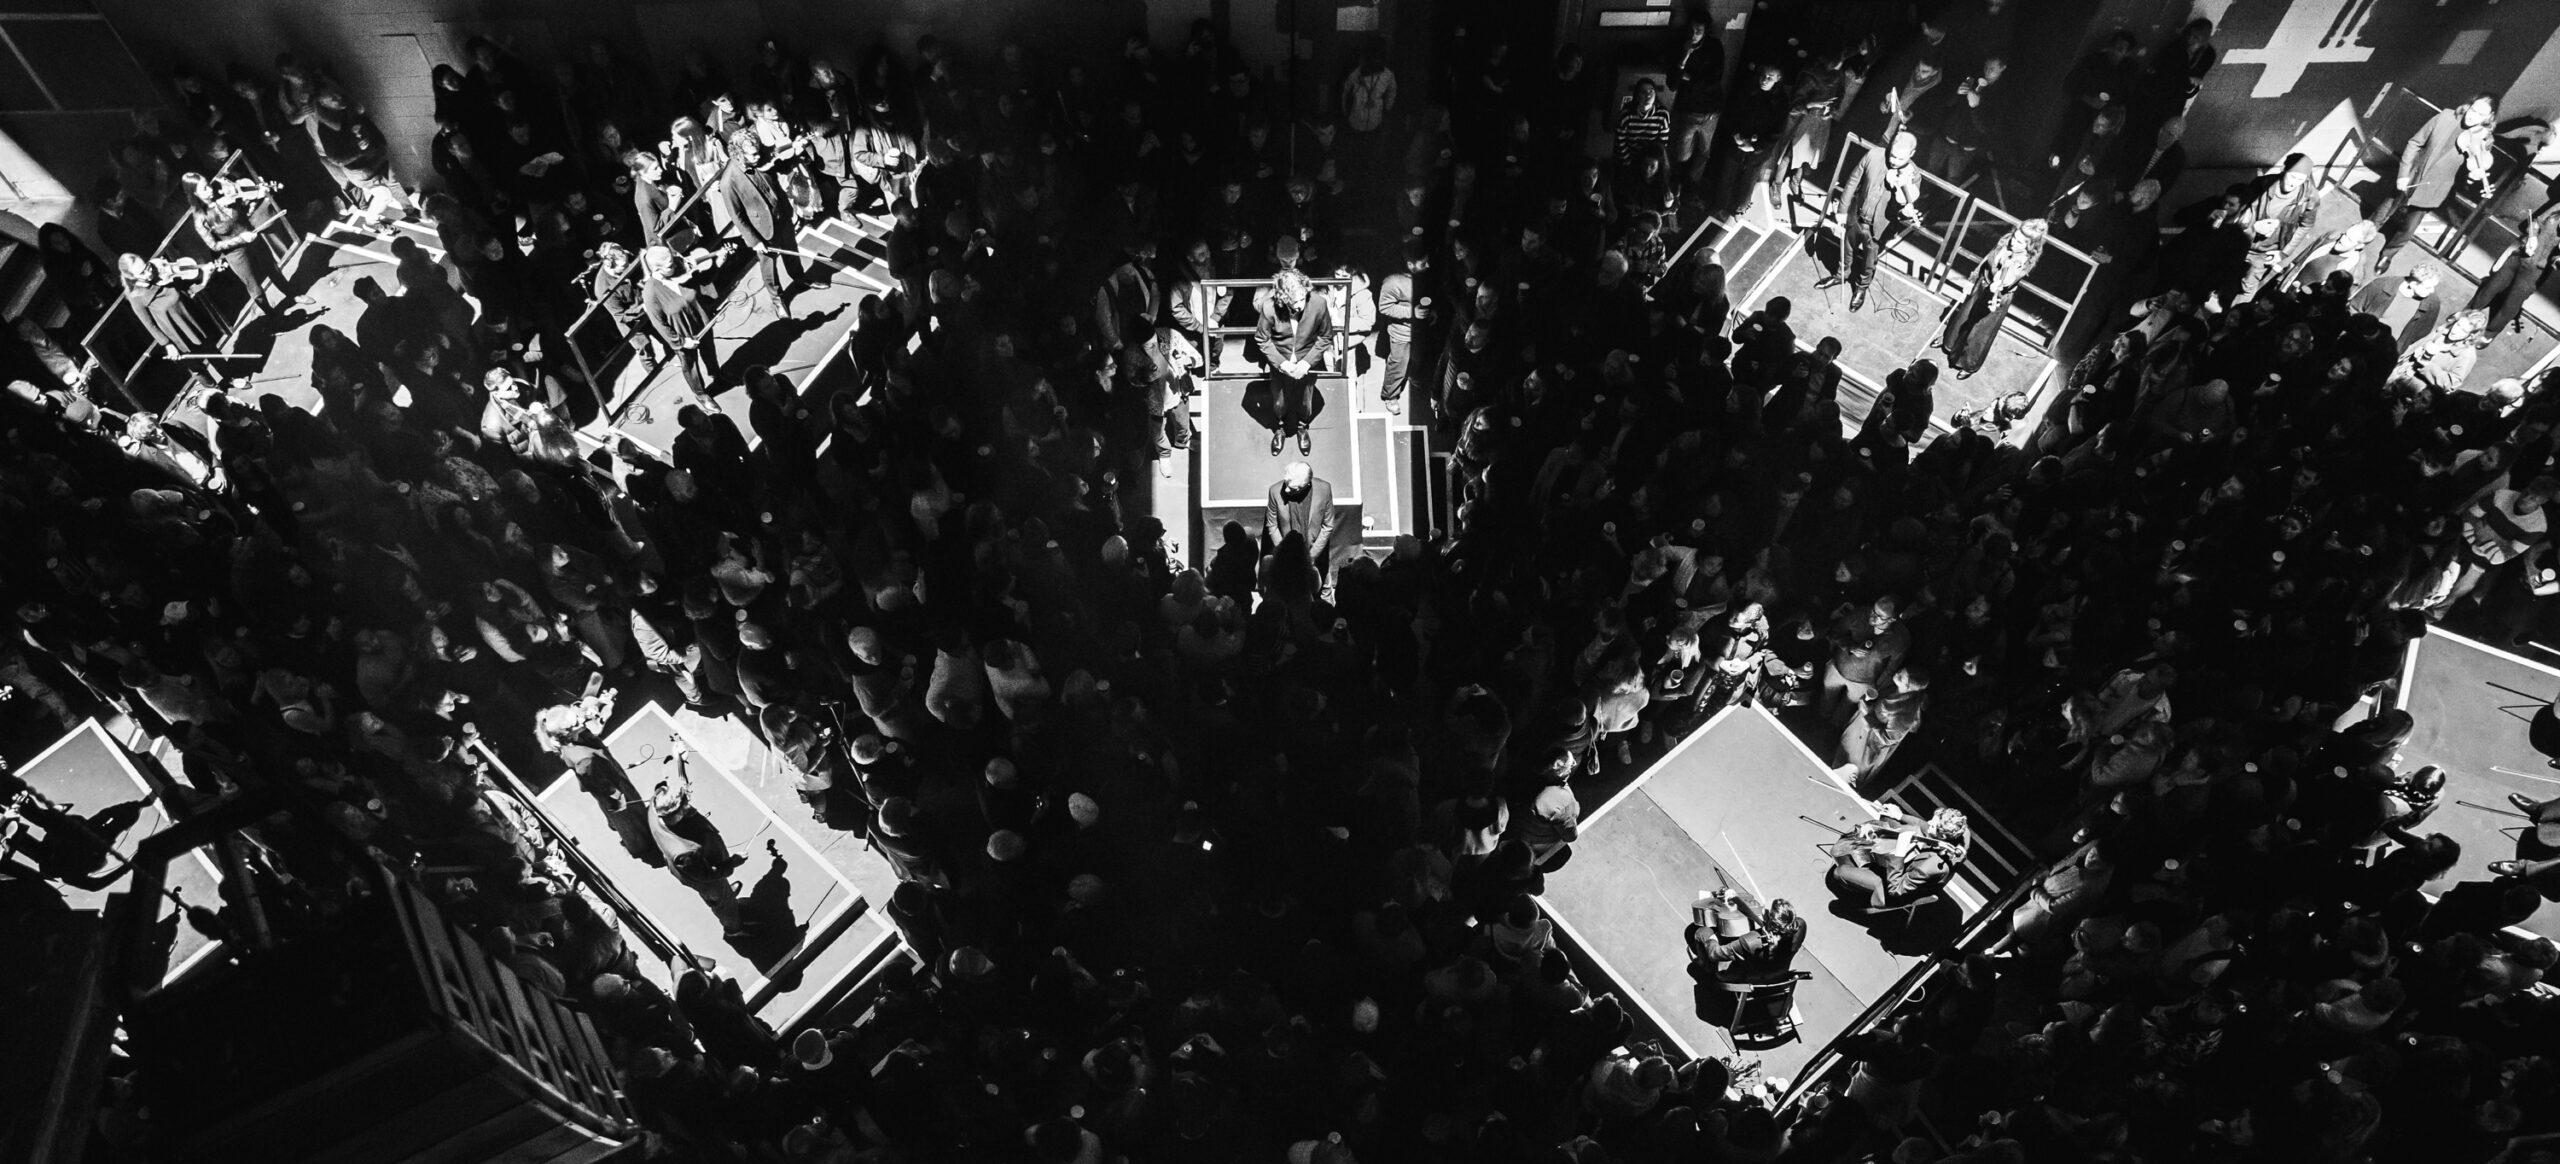 A bird's eye view of an orchestra, split into their sections, lit up with the audience among them